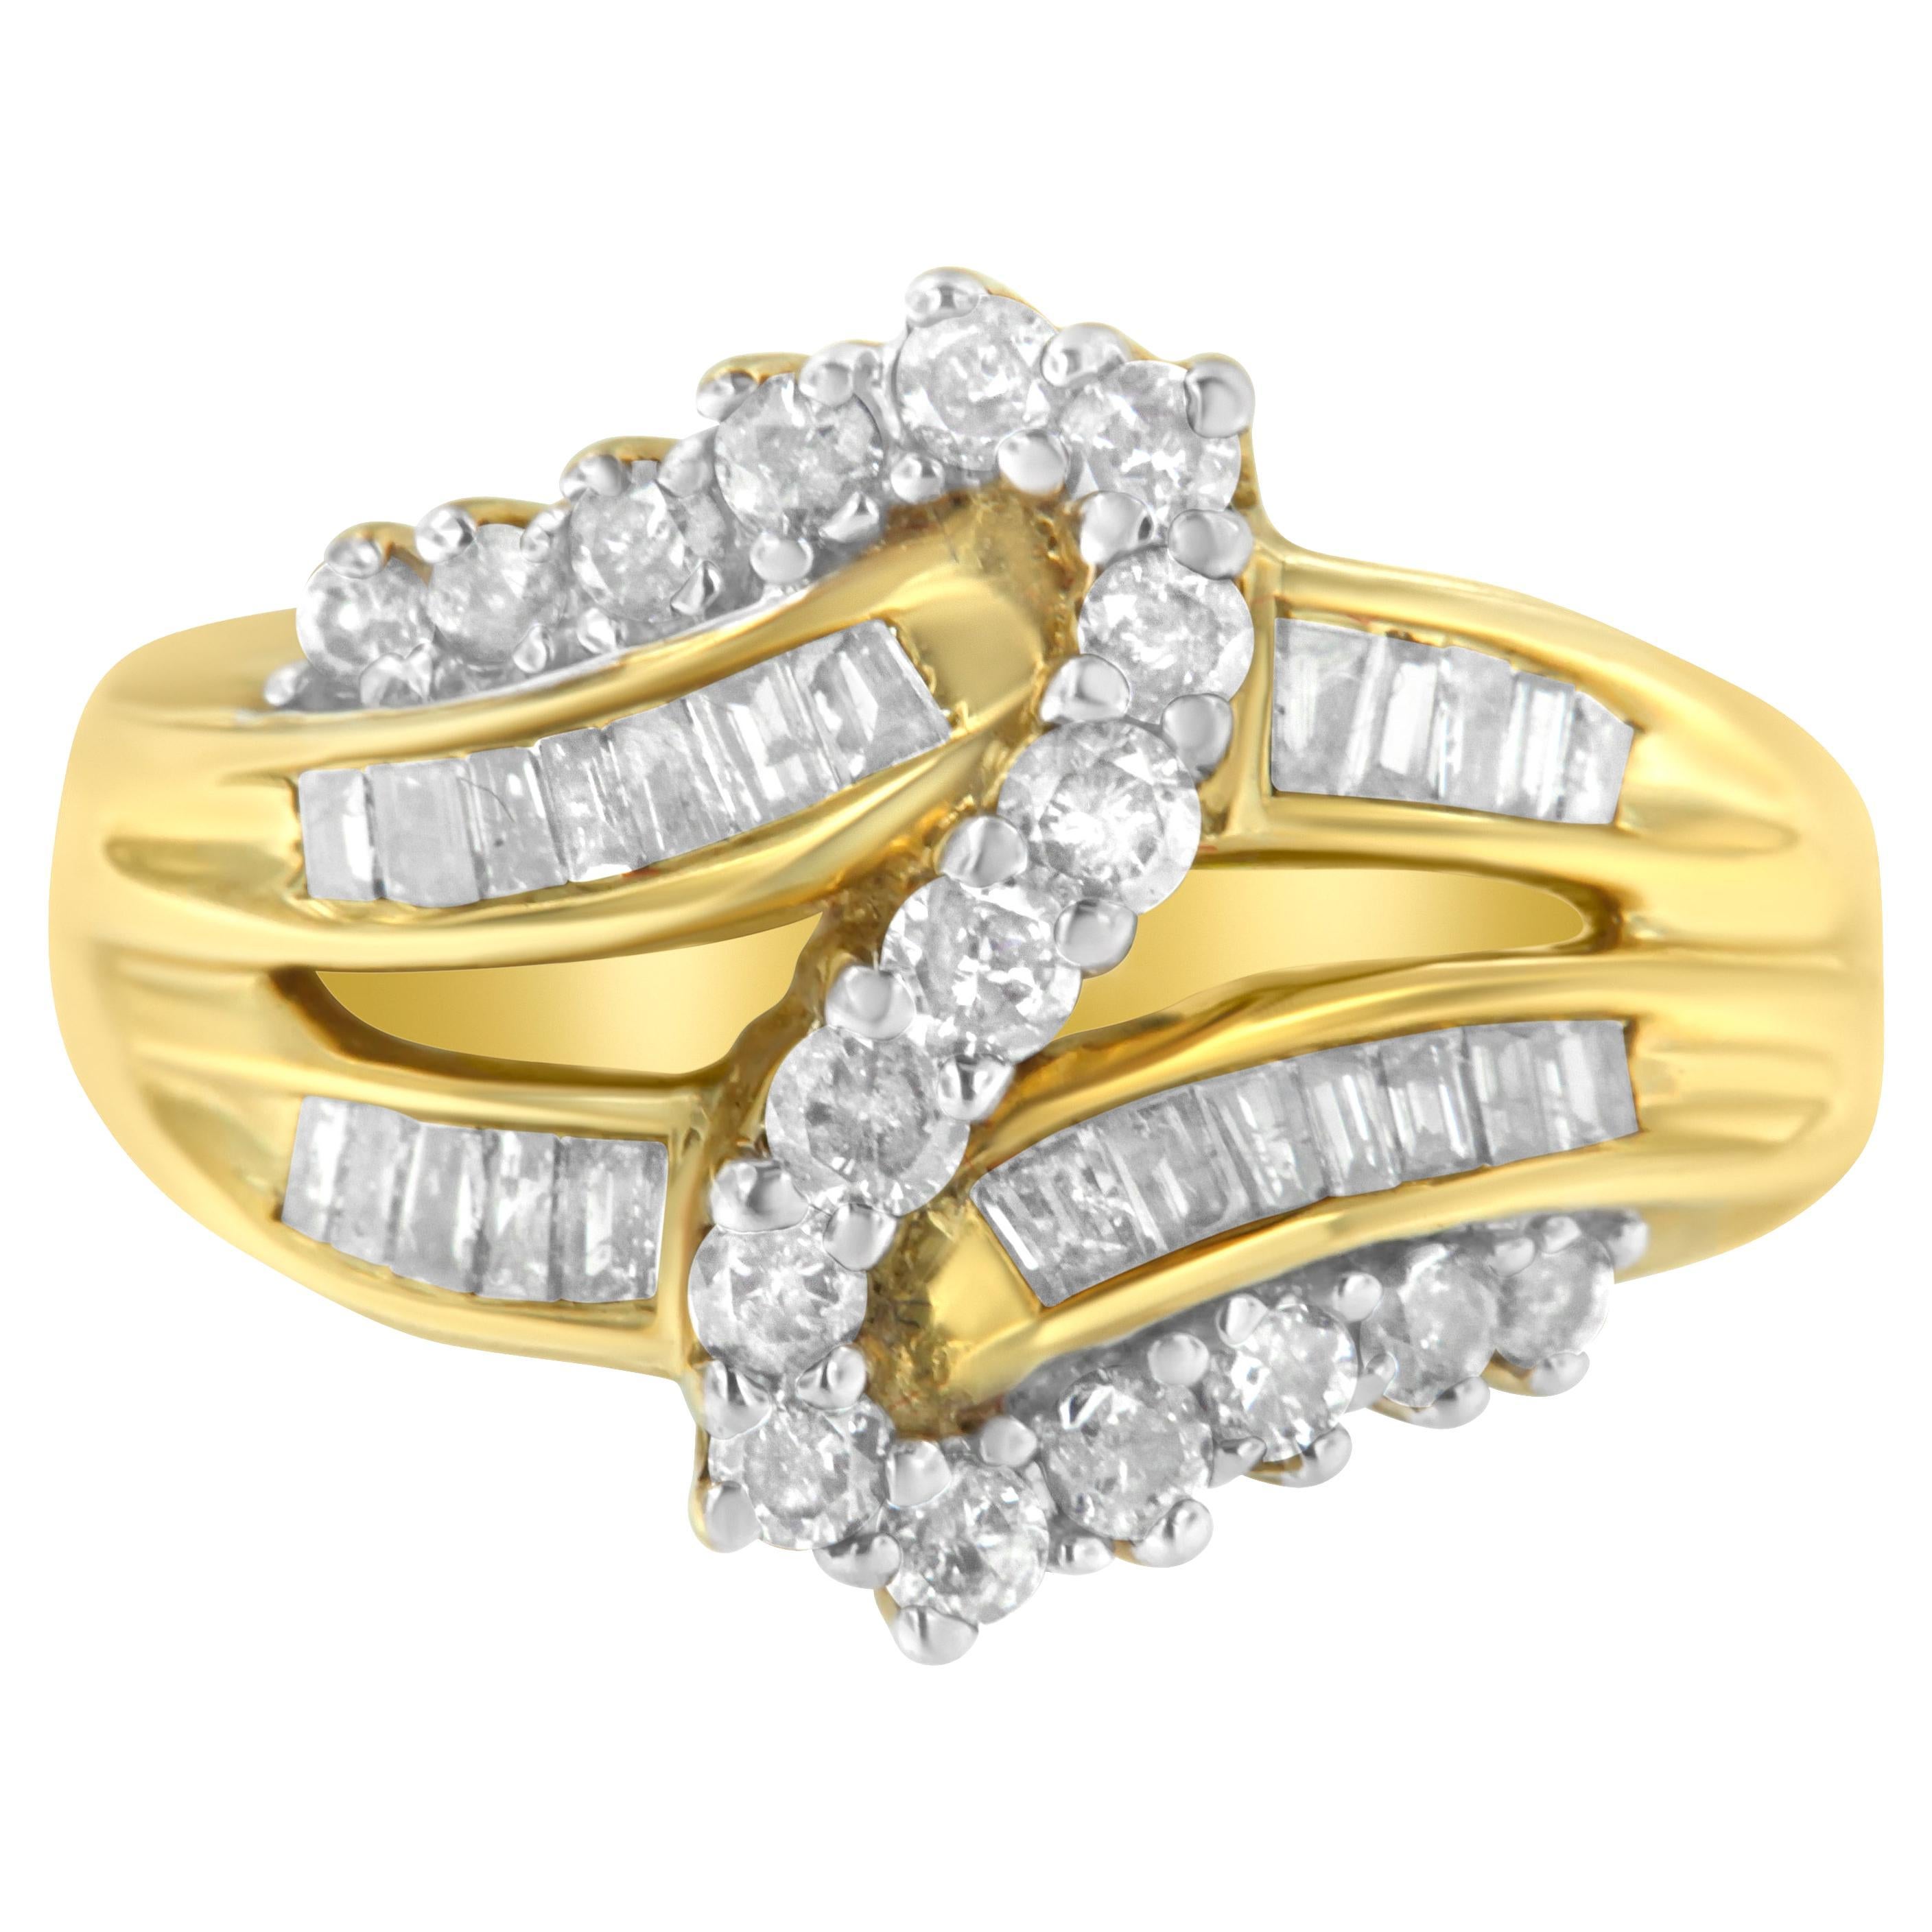 For Sale:  10K Yellow Gold 1.0 Carat Round and Baguette Cut Diamond Bypass Ring